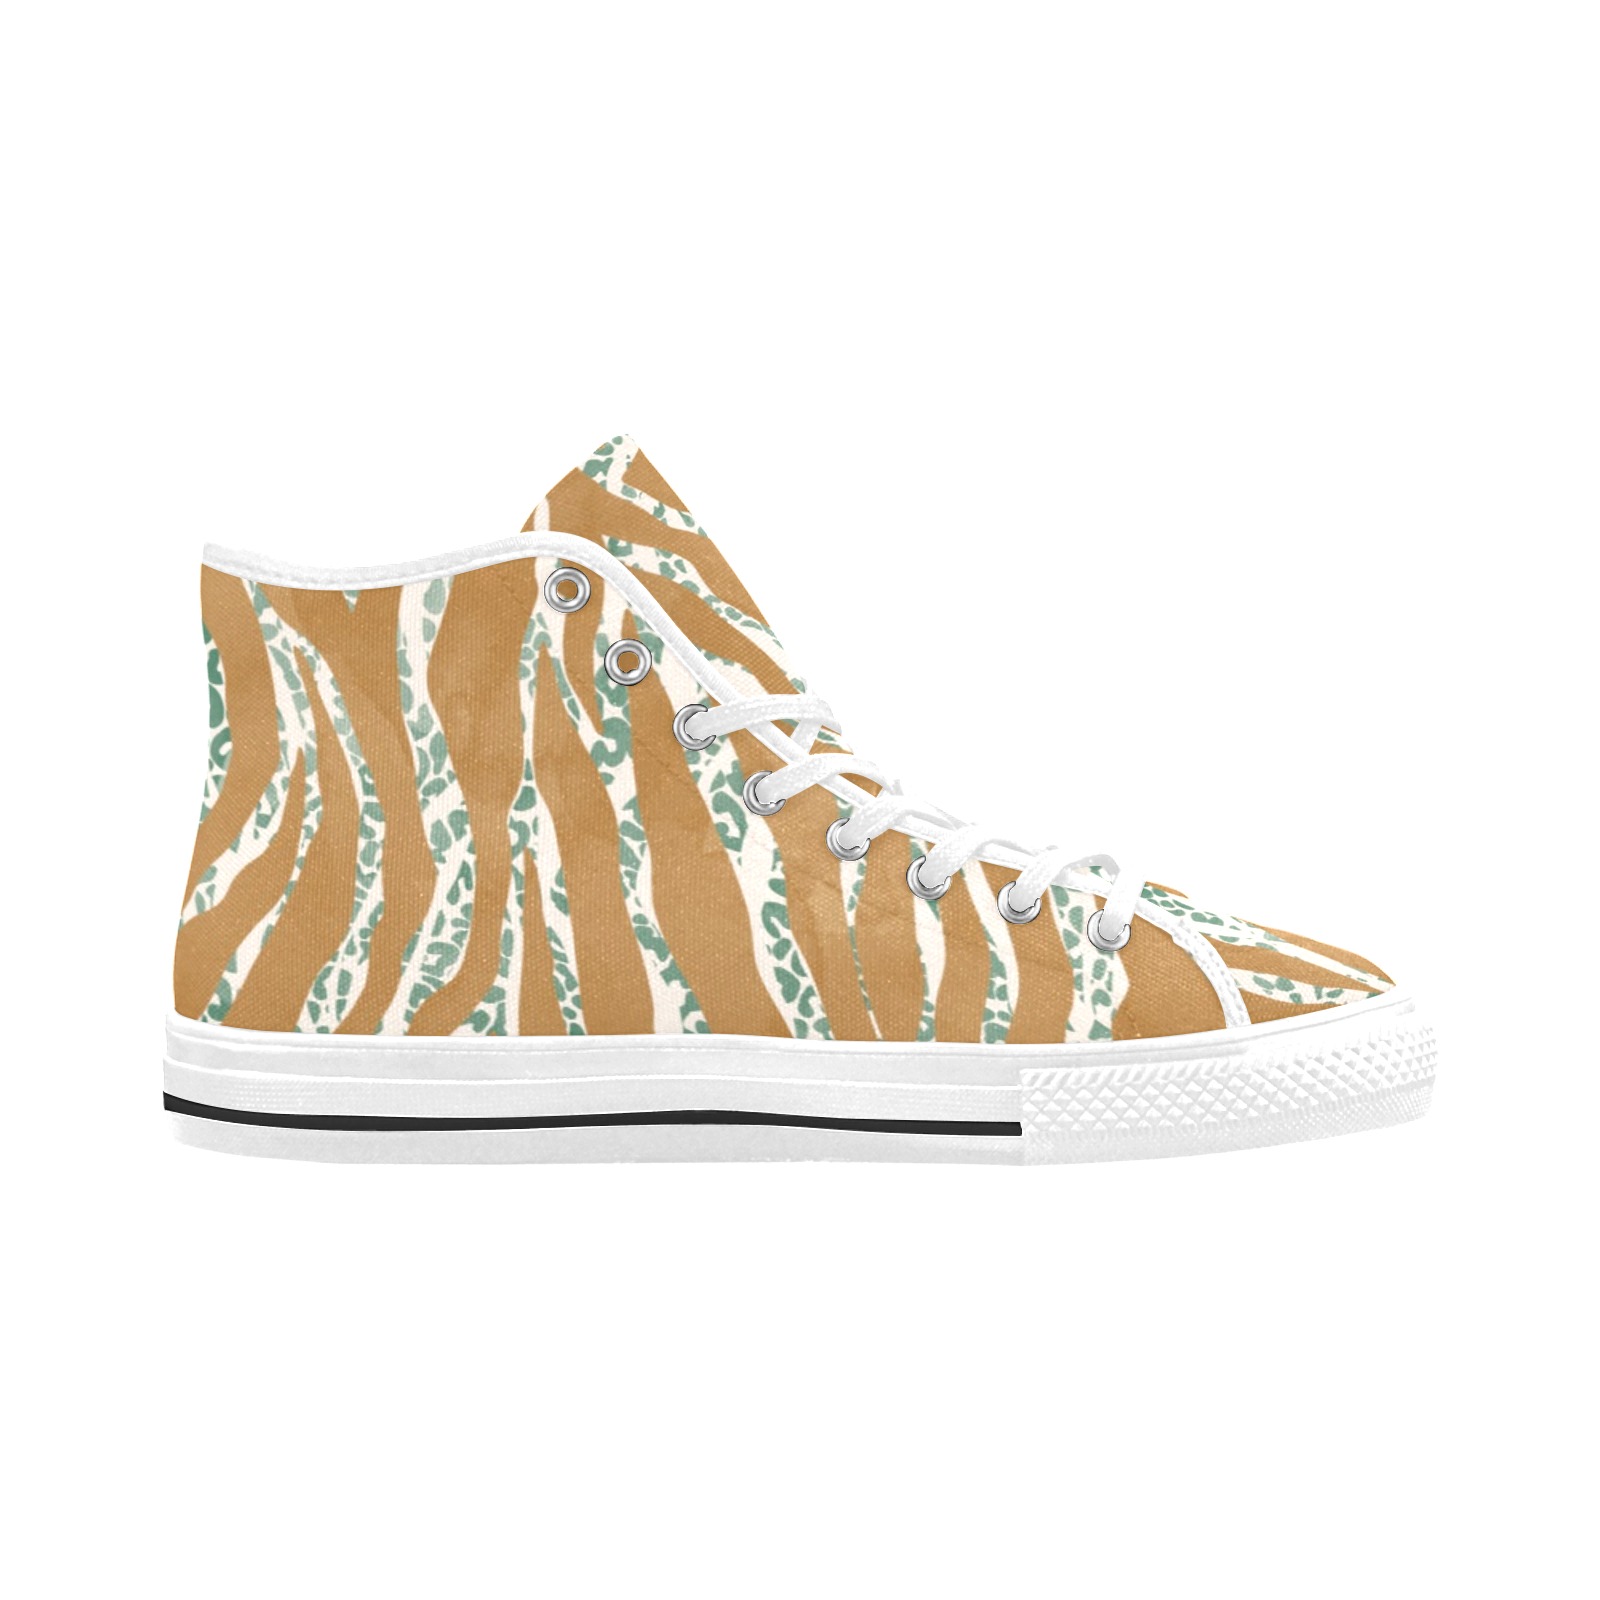 0085-WILD SKIN ANIMAL F Vancouver H Women's Canvas Shoes (1013-1)